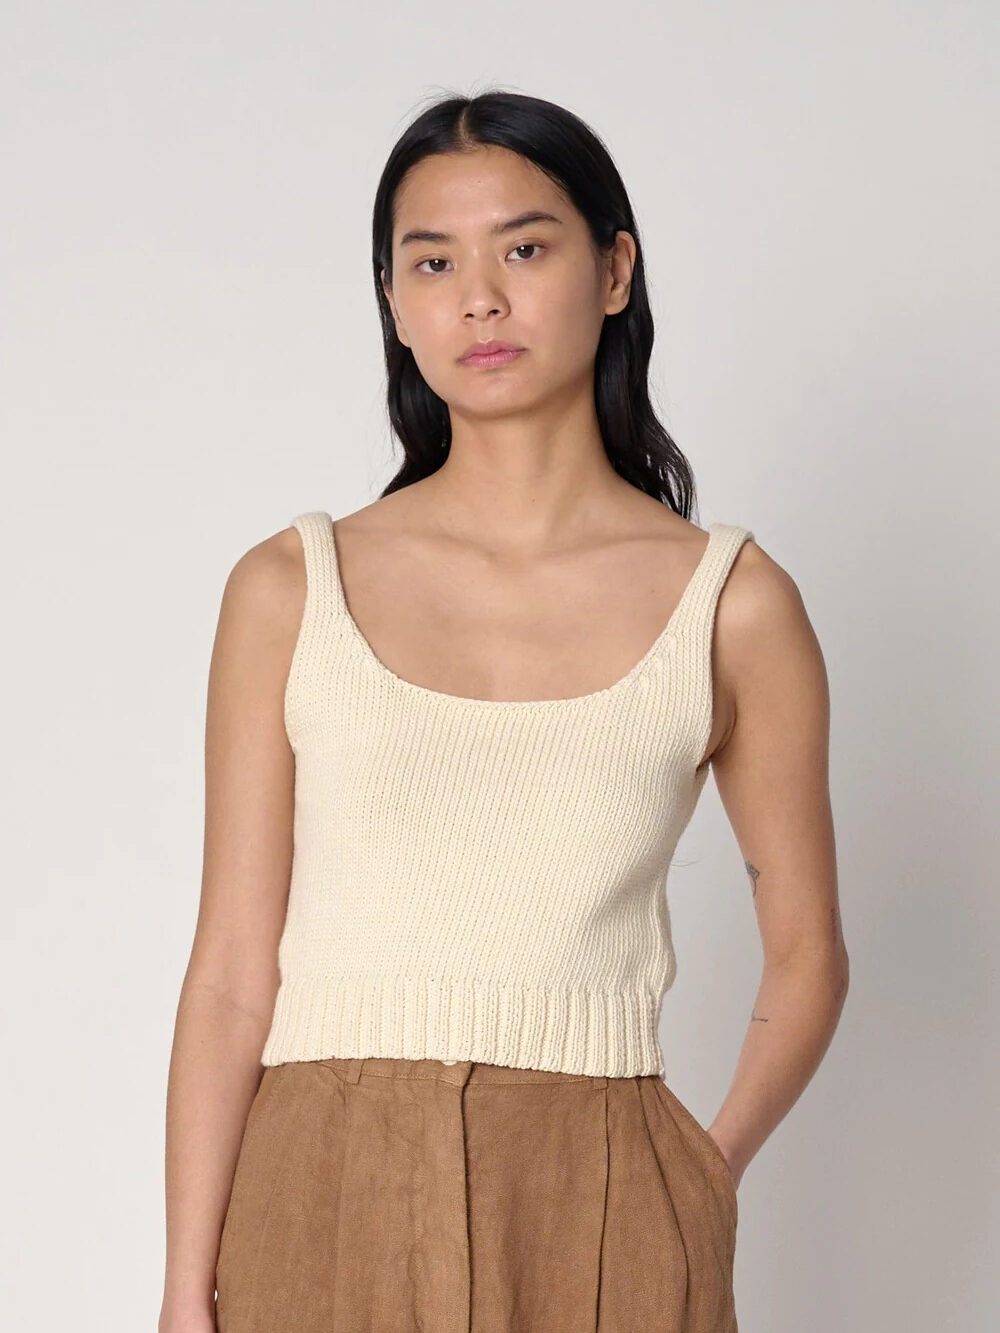 A model wearing a cream knit tank sweater by Shaina Mote.